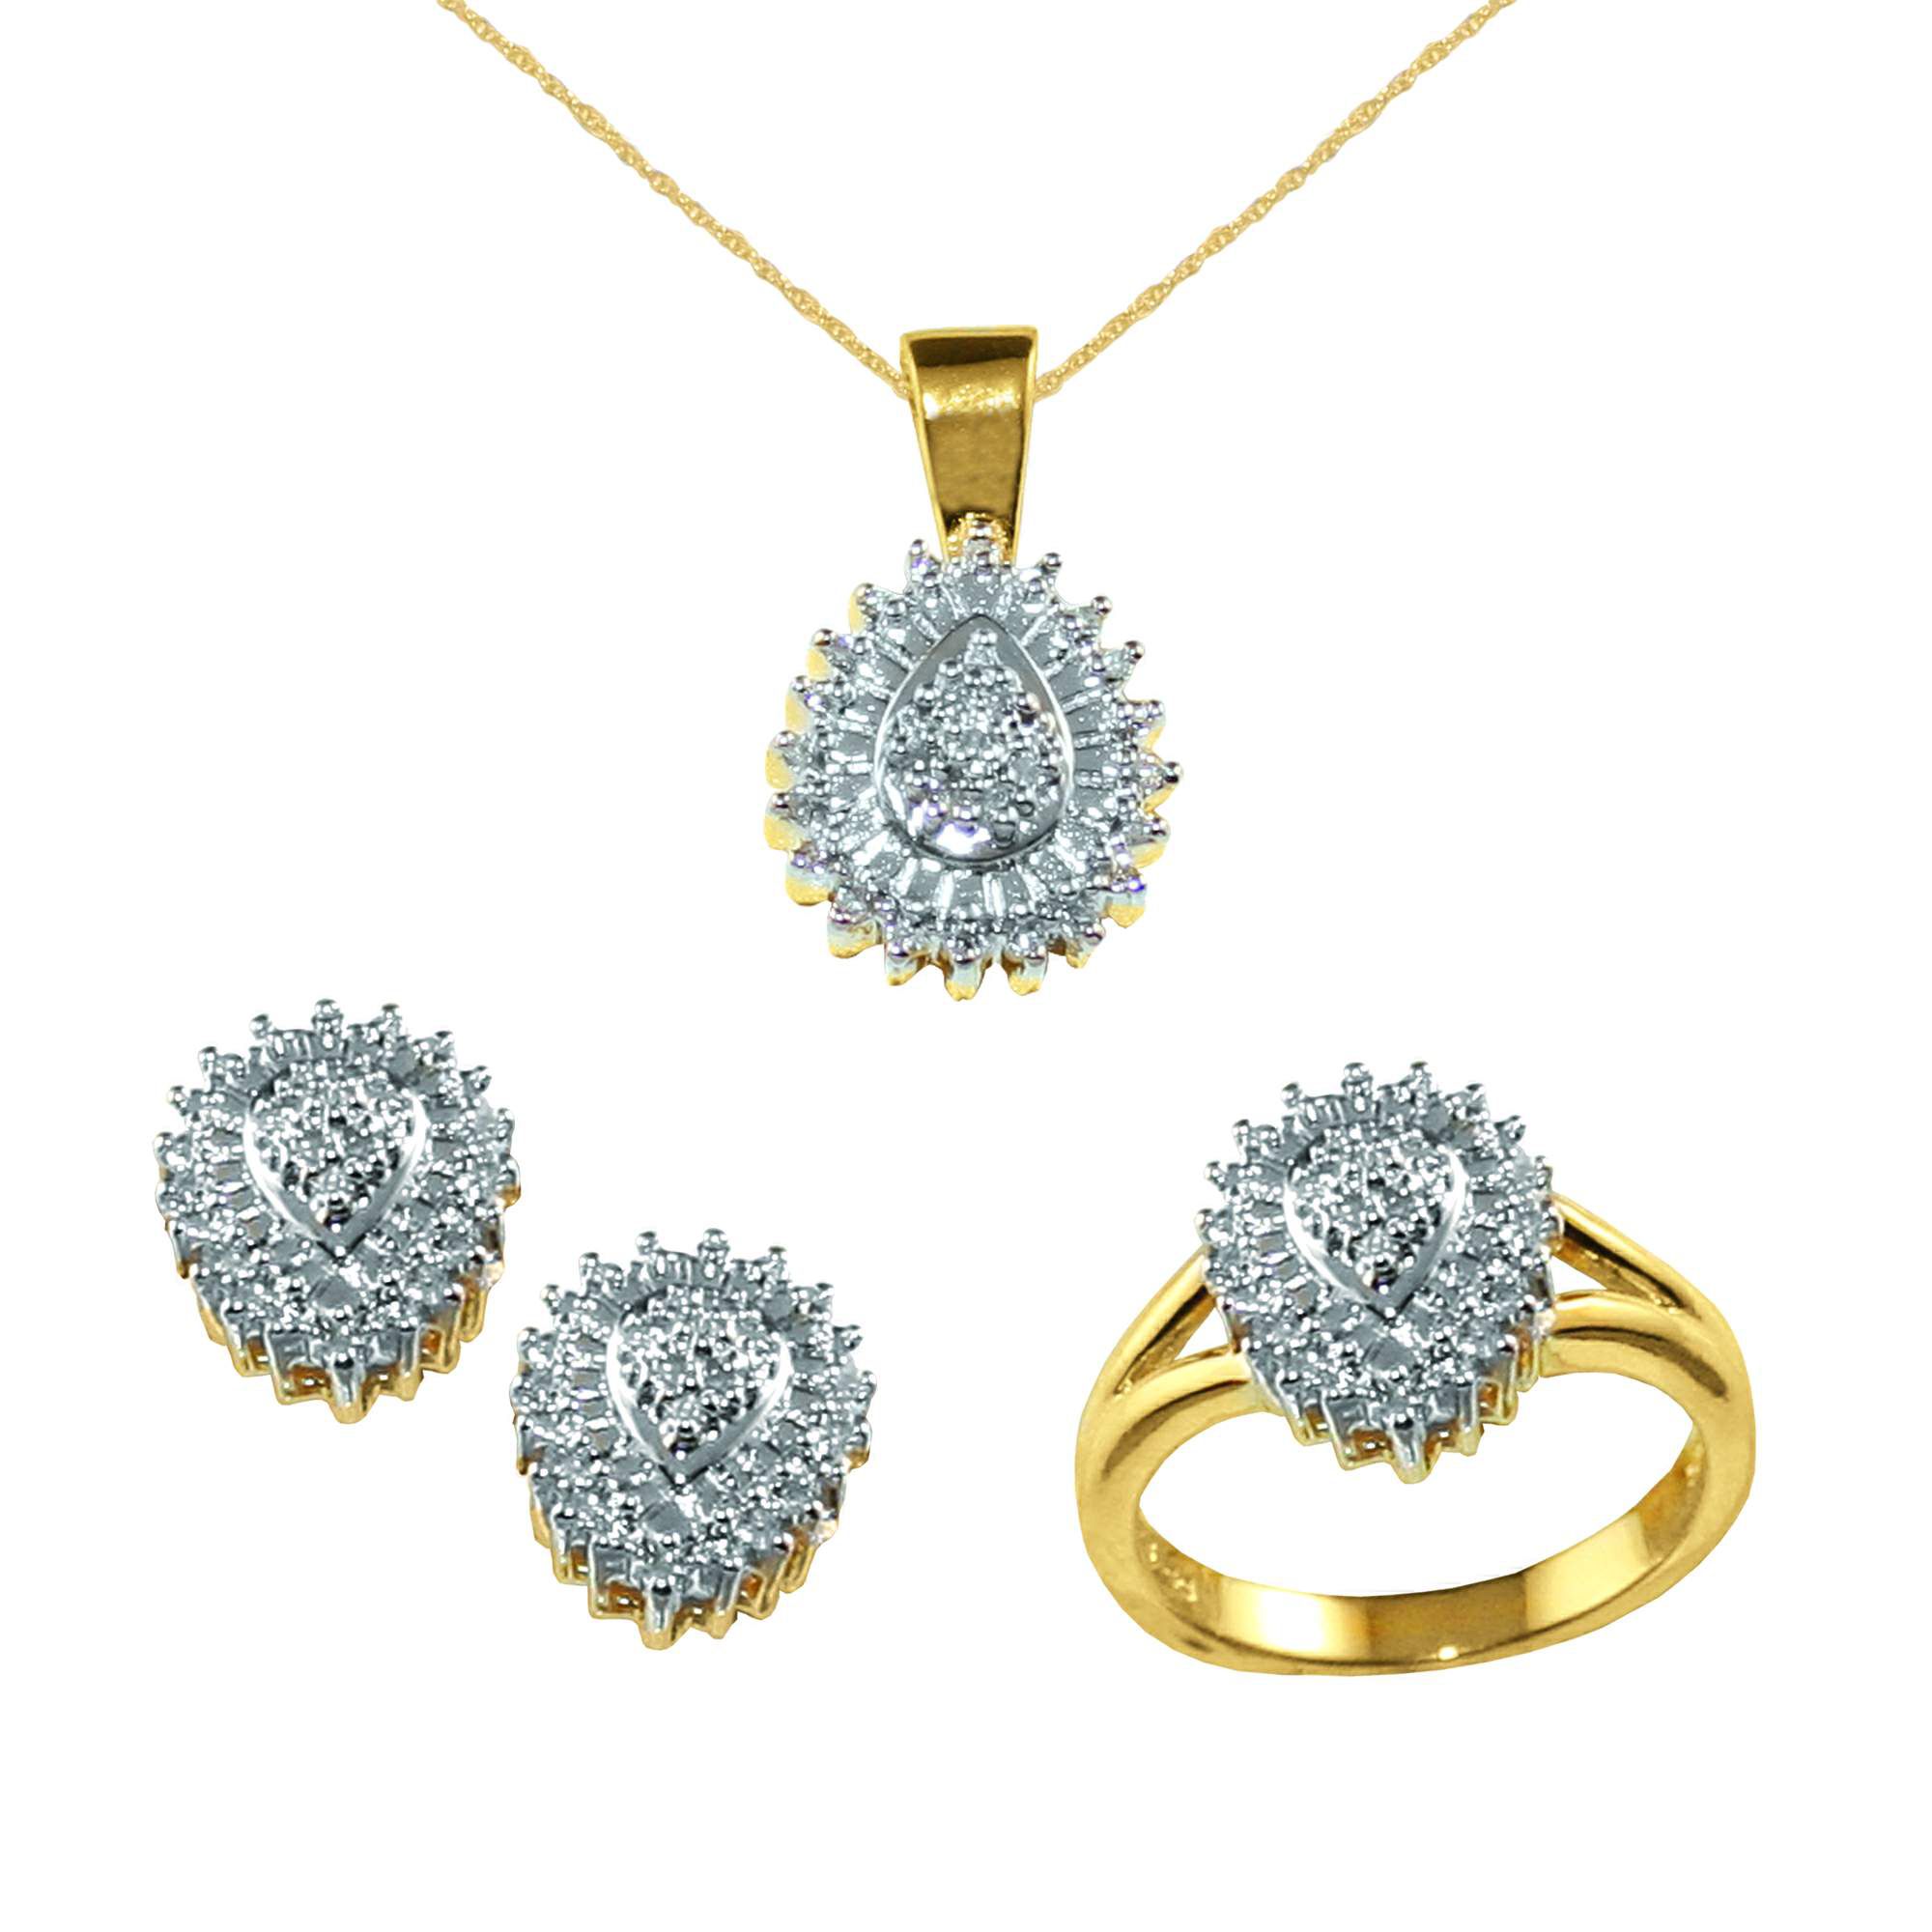 INCREDIBLE BUY&#33; 18kt Gold over Sterling Silver Ring, Pendant, and Earring Set